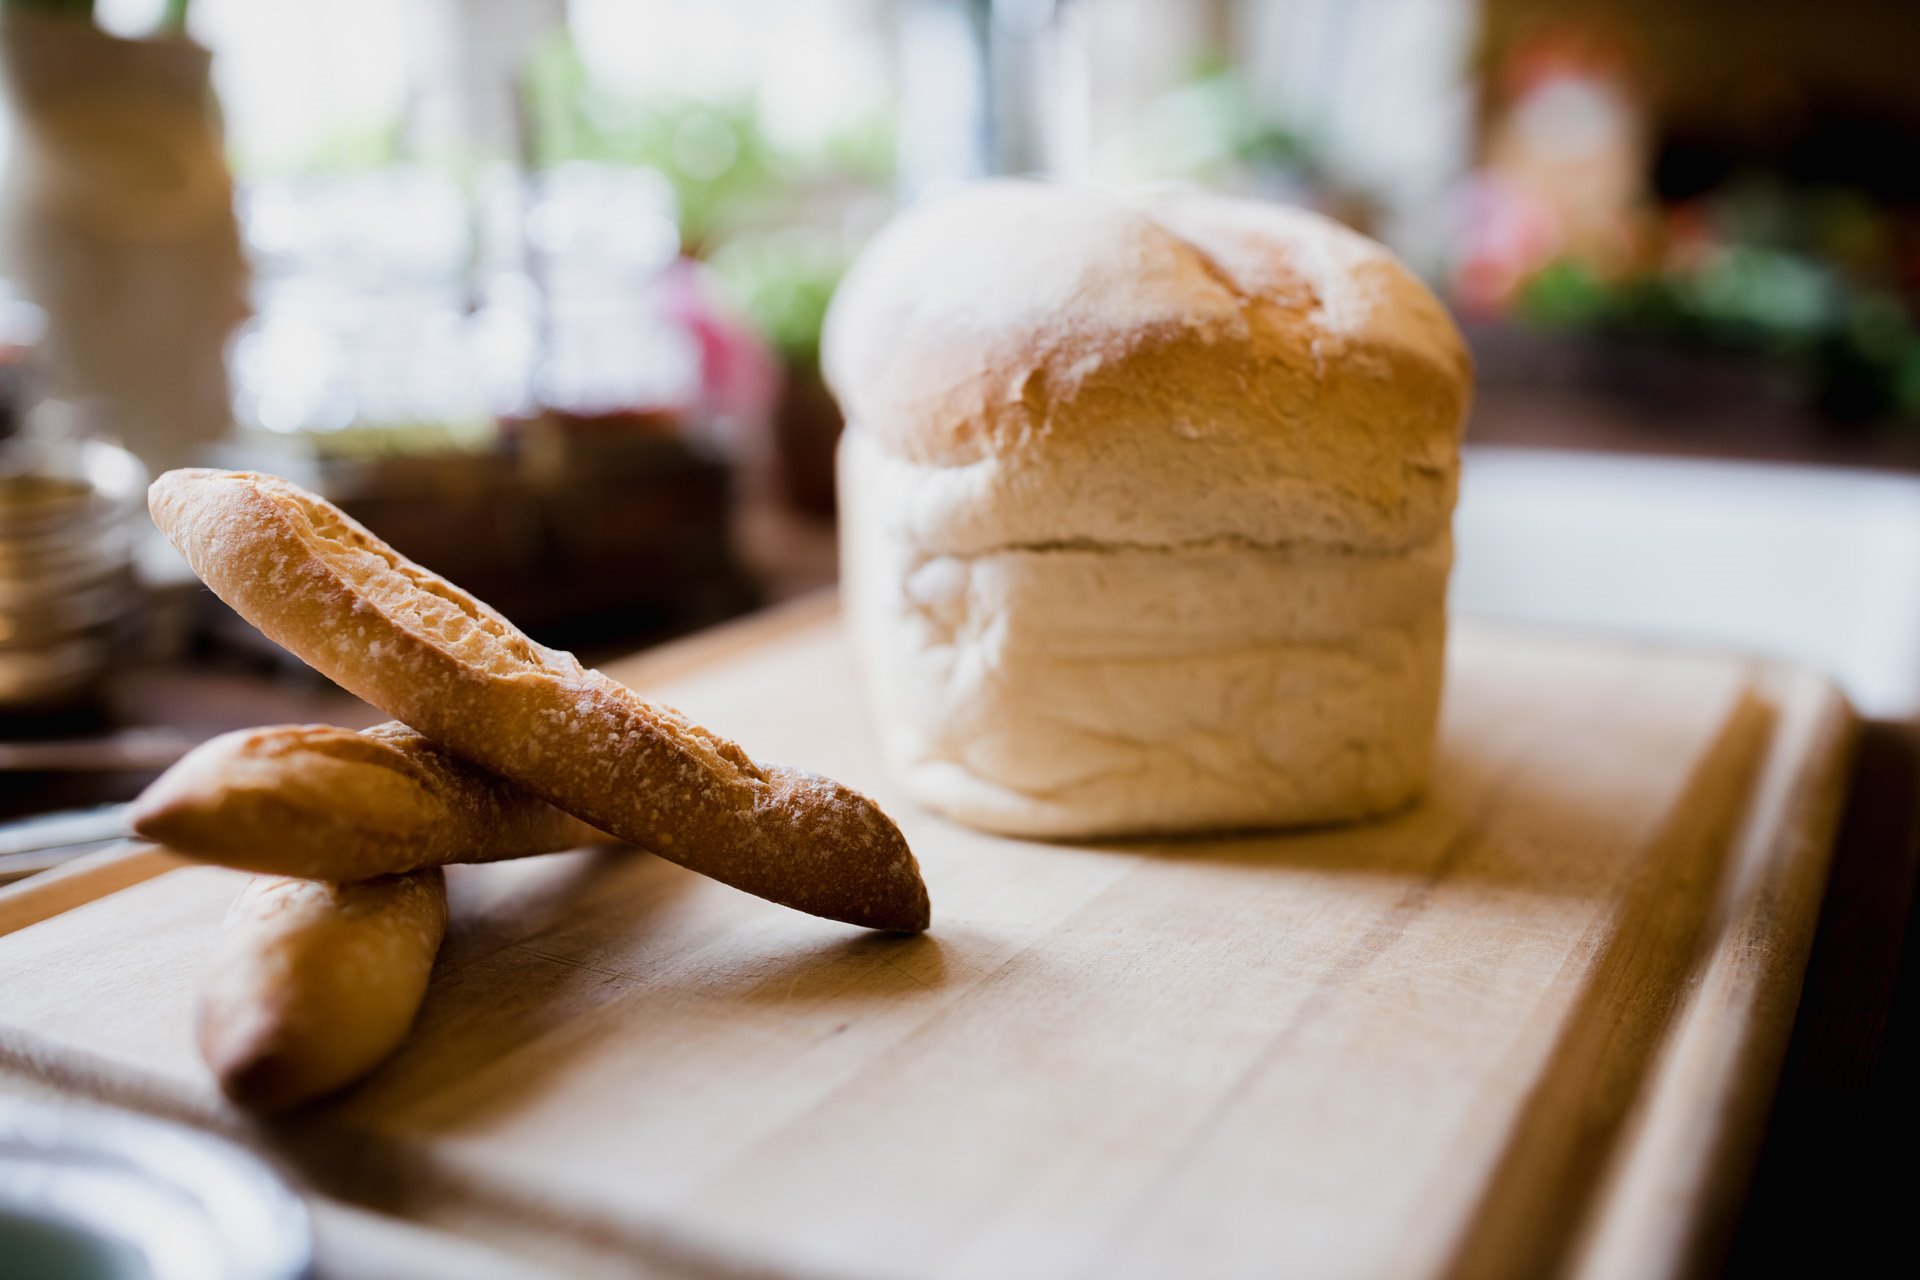 Freshly baked bread, french sticks and white loaf ready for post wedding breakfasts to soak up hangovers at Elmore Court